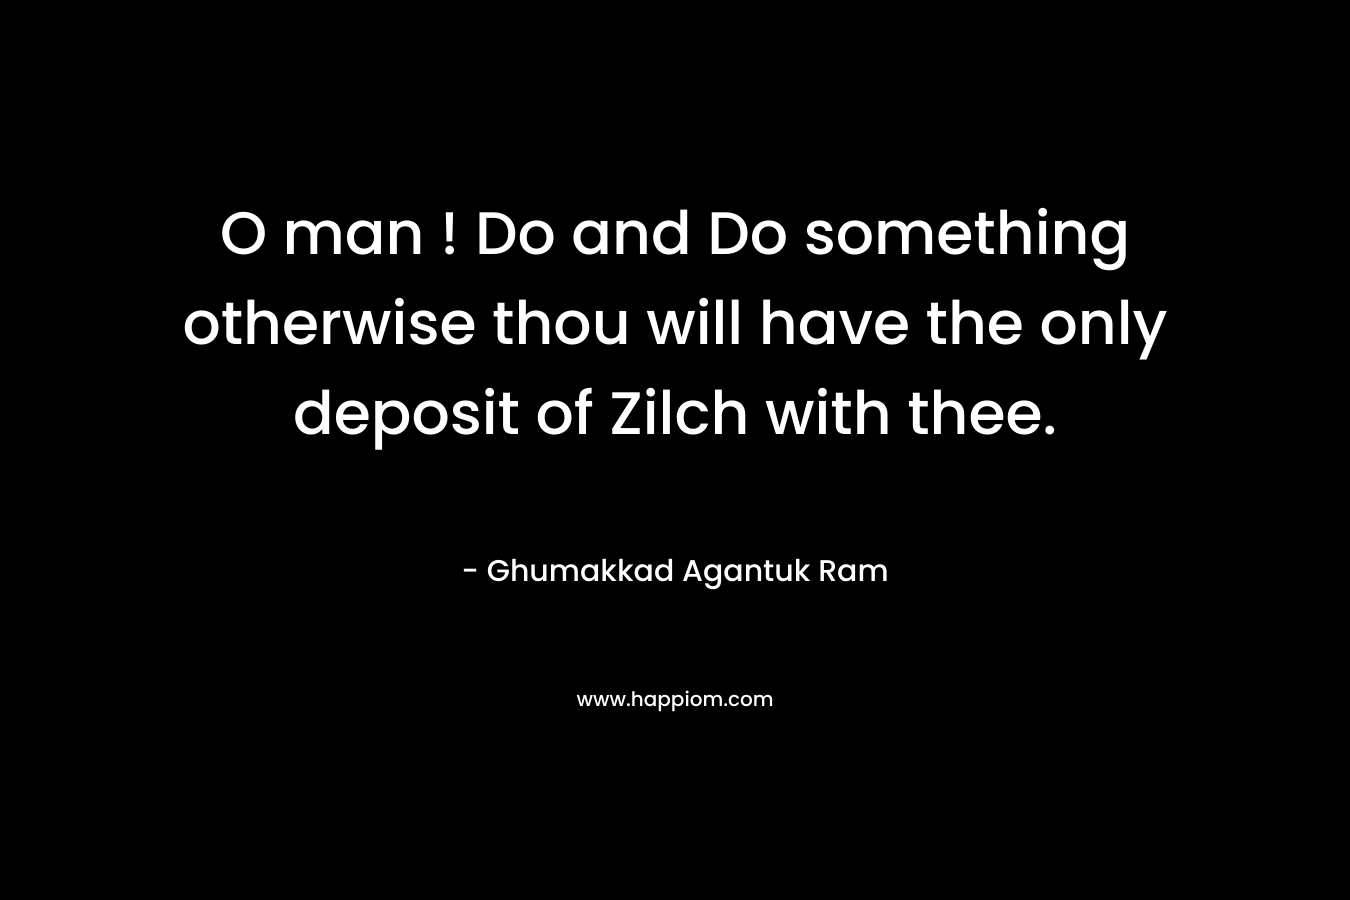 O man ! Do and Do something otherwise thou will have the only deposit of Zilch with thee. – Ghumakkad Agantuk Ram